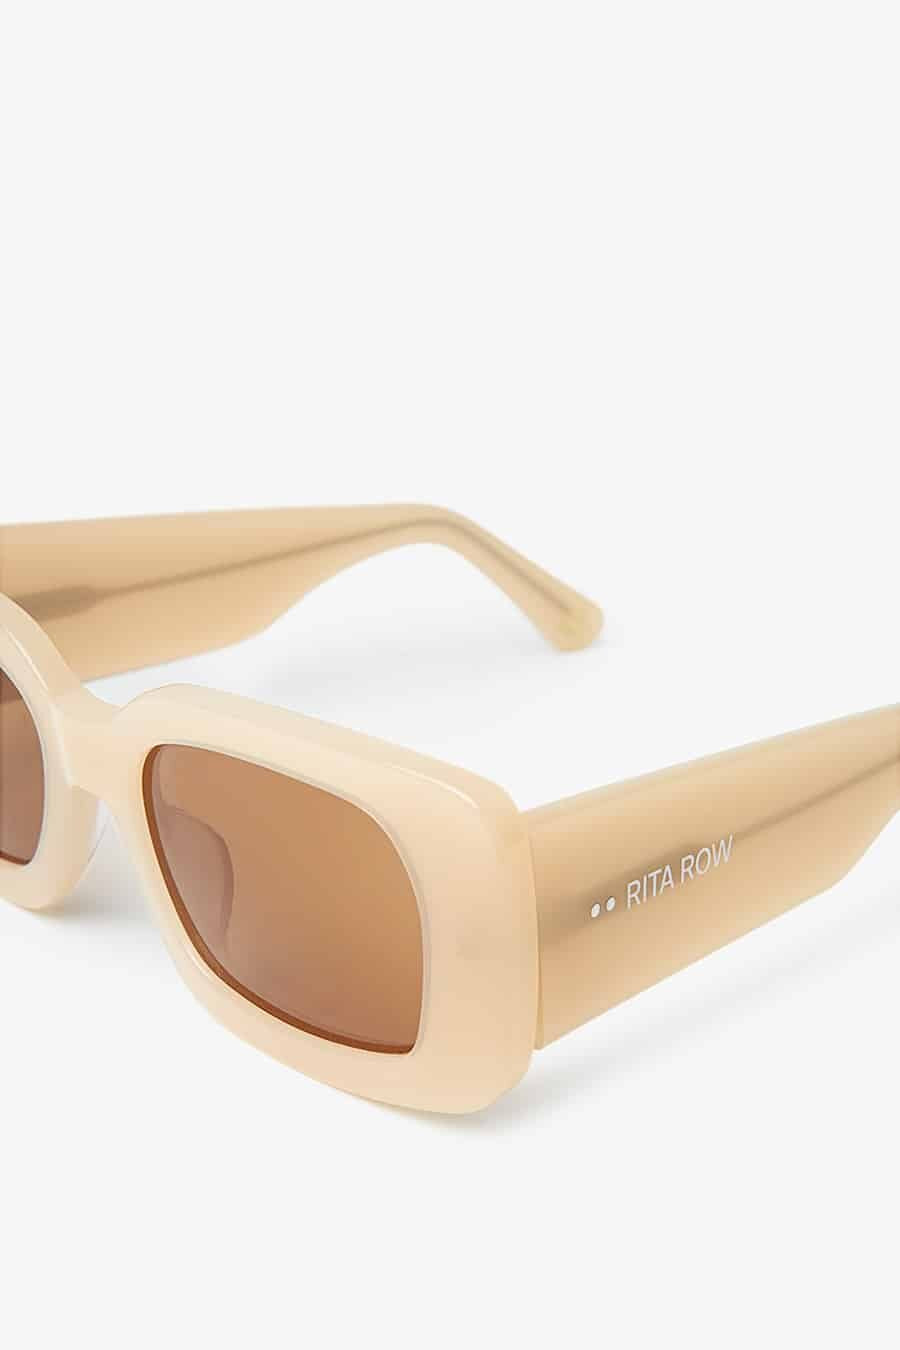 Throw on these oversized square sunnies to be the perfect statement to any outfit. 100% UV protection. Ethically made in Spain.